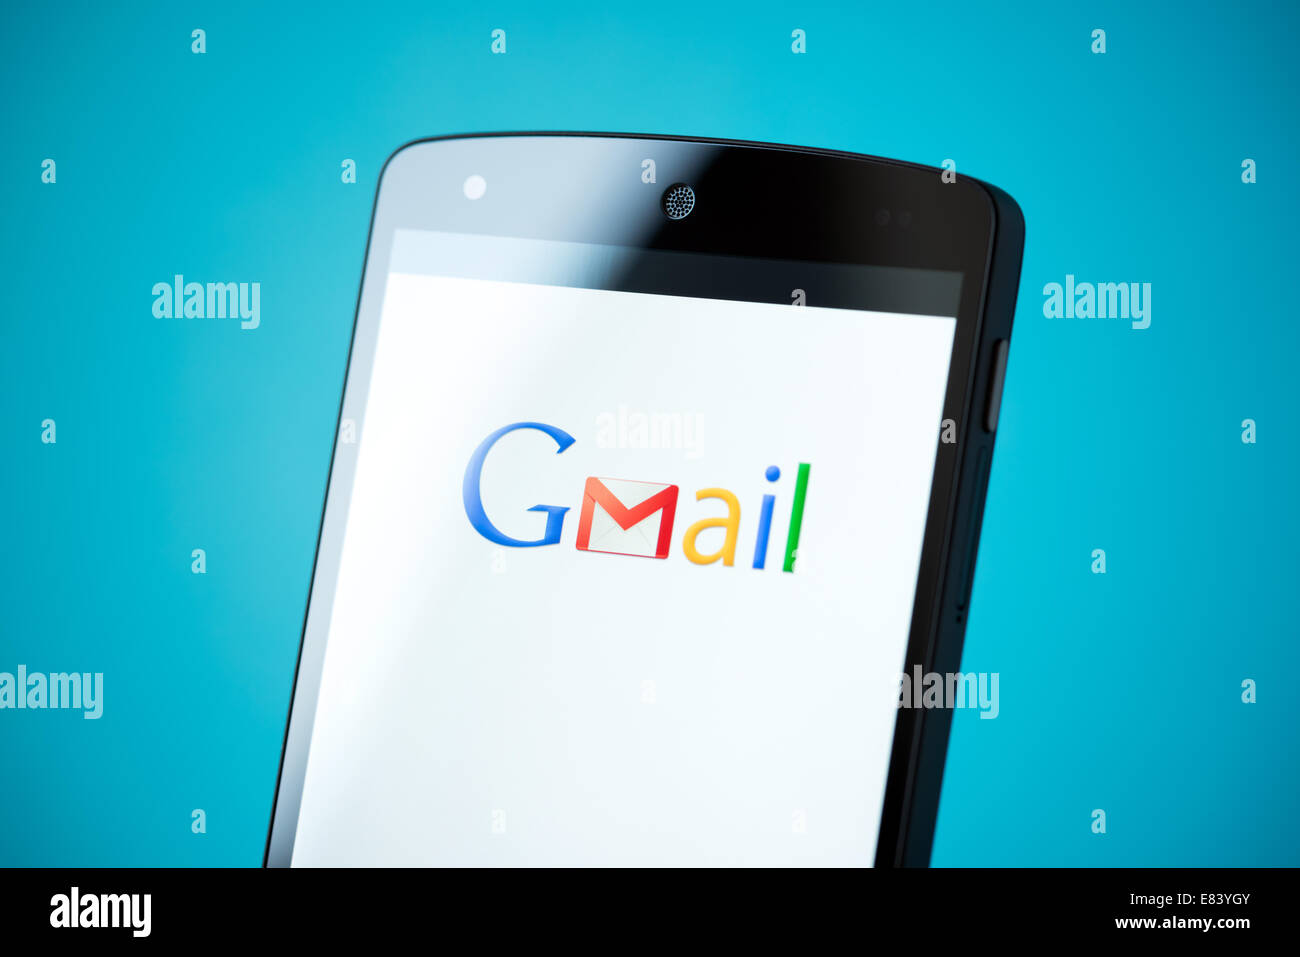 Close-up shot of brand new Google Nexus 5, powered by Android 4.4 version with Gmail logotype on a screen. Stock Photo